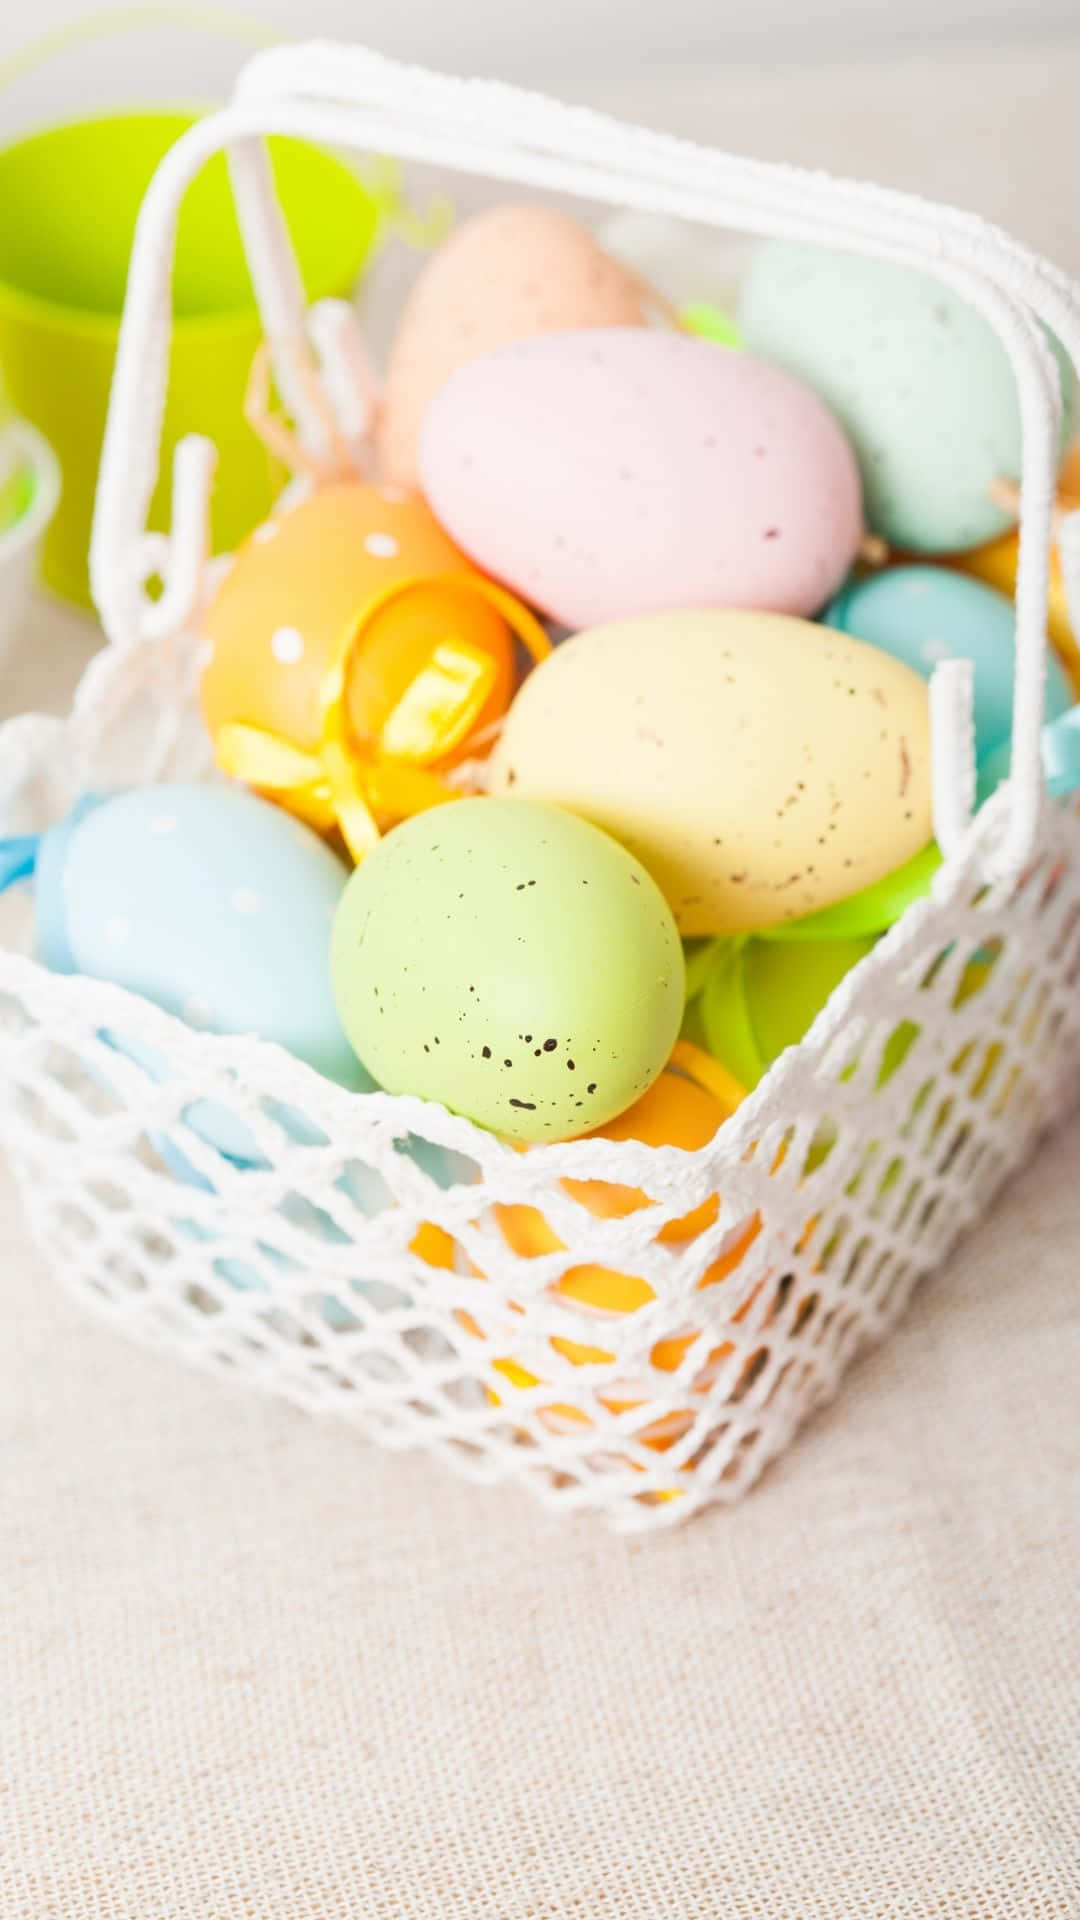 A Basket Of Colorful Easter Eggs On A Table Wallpaper